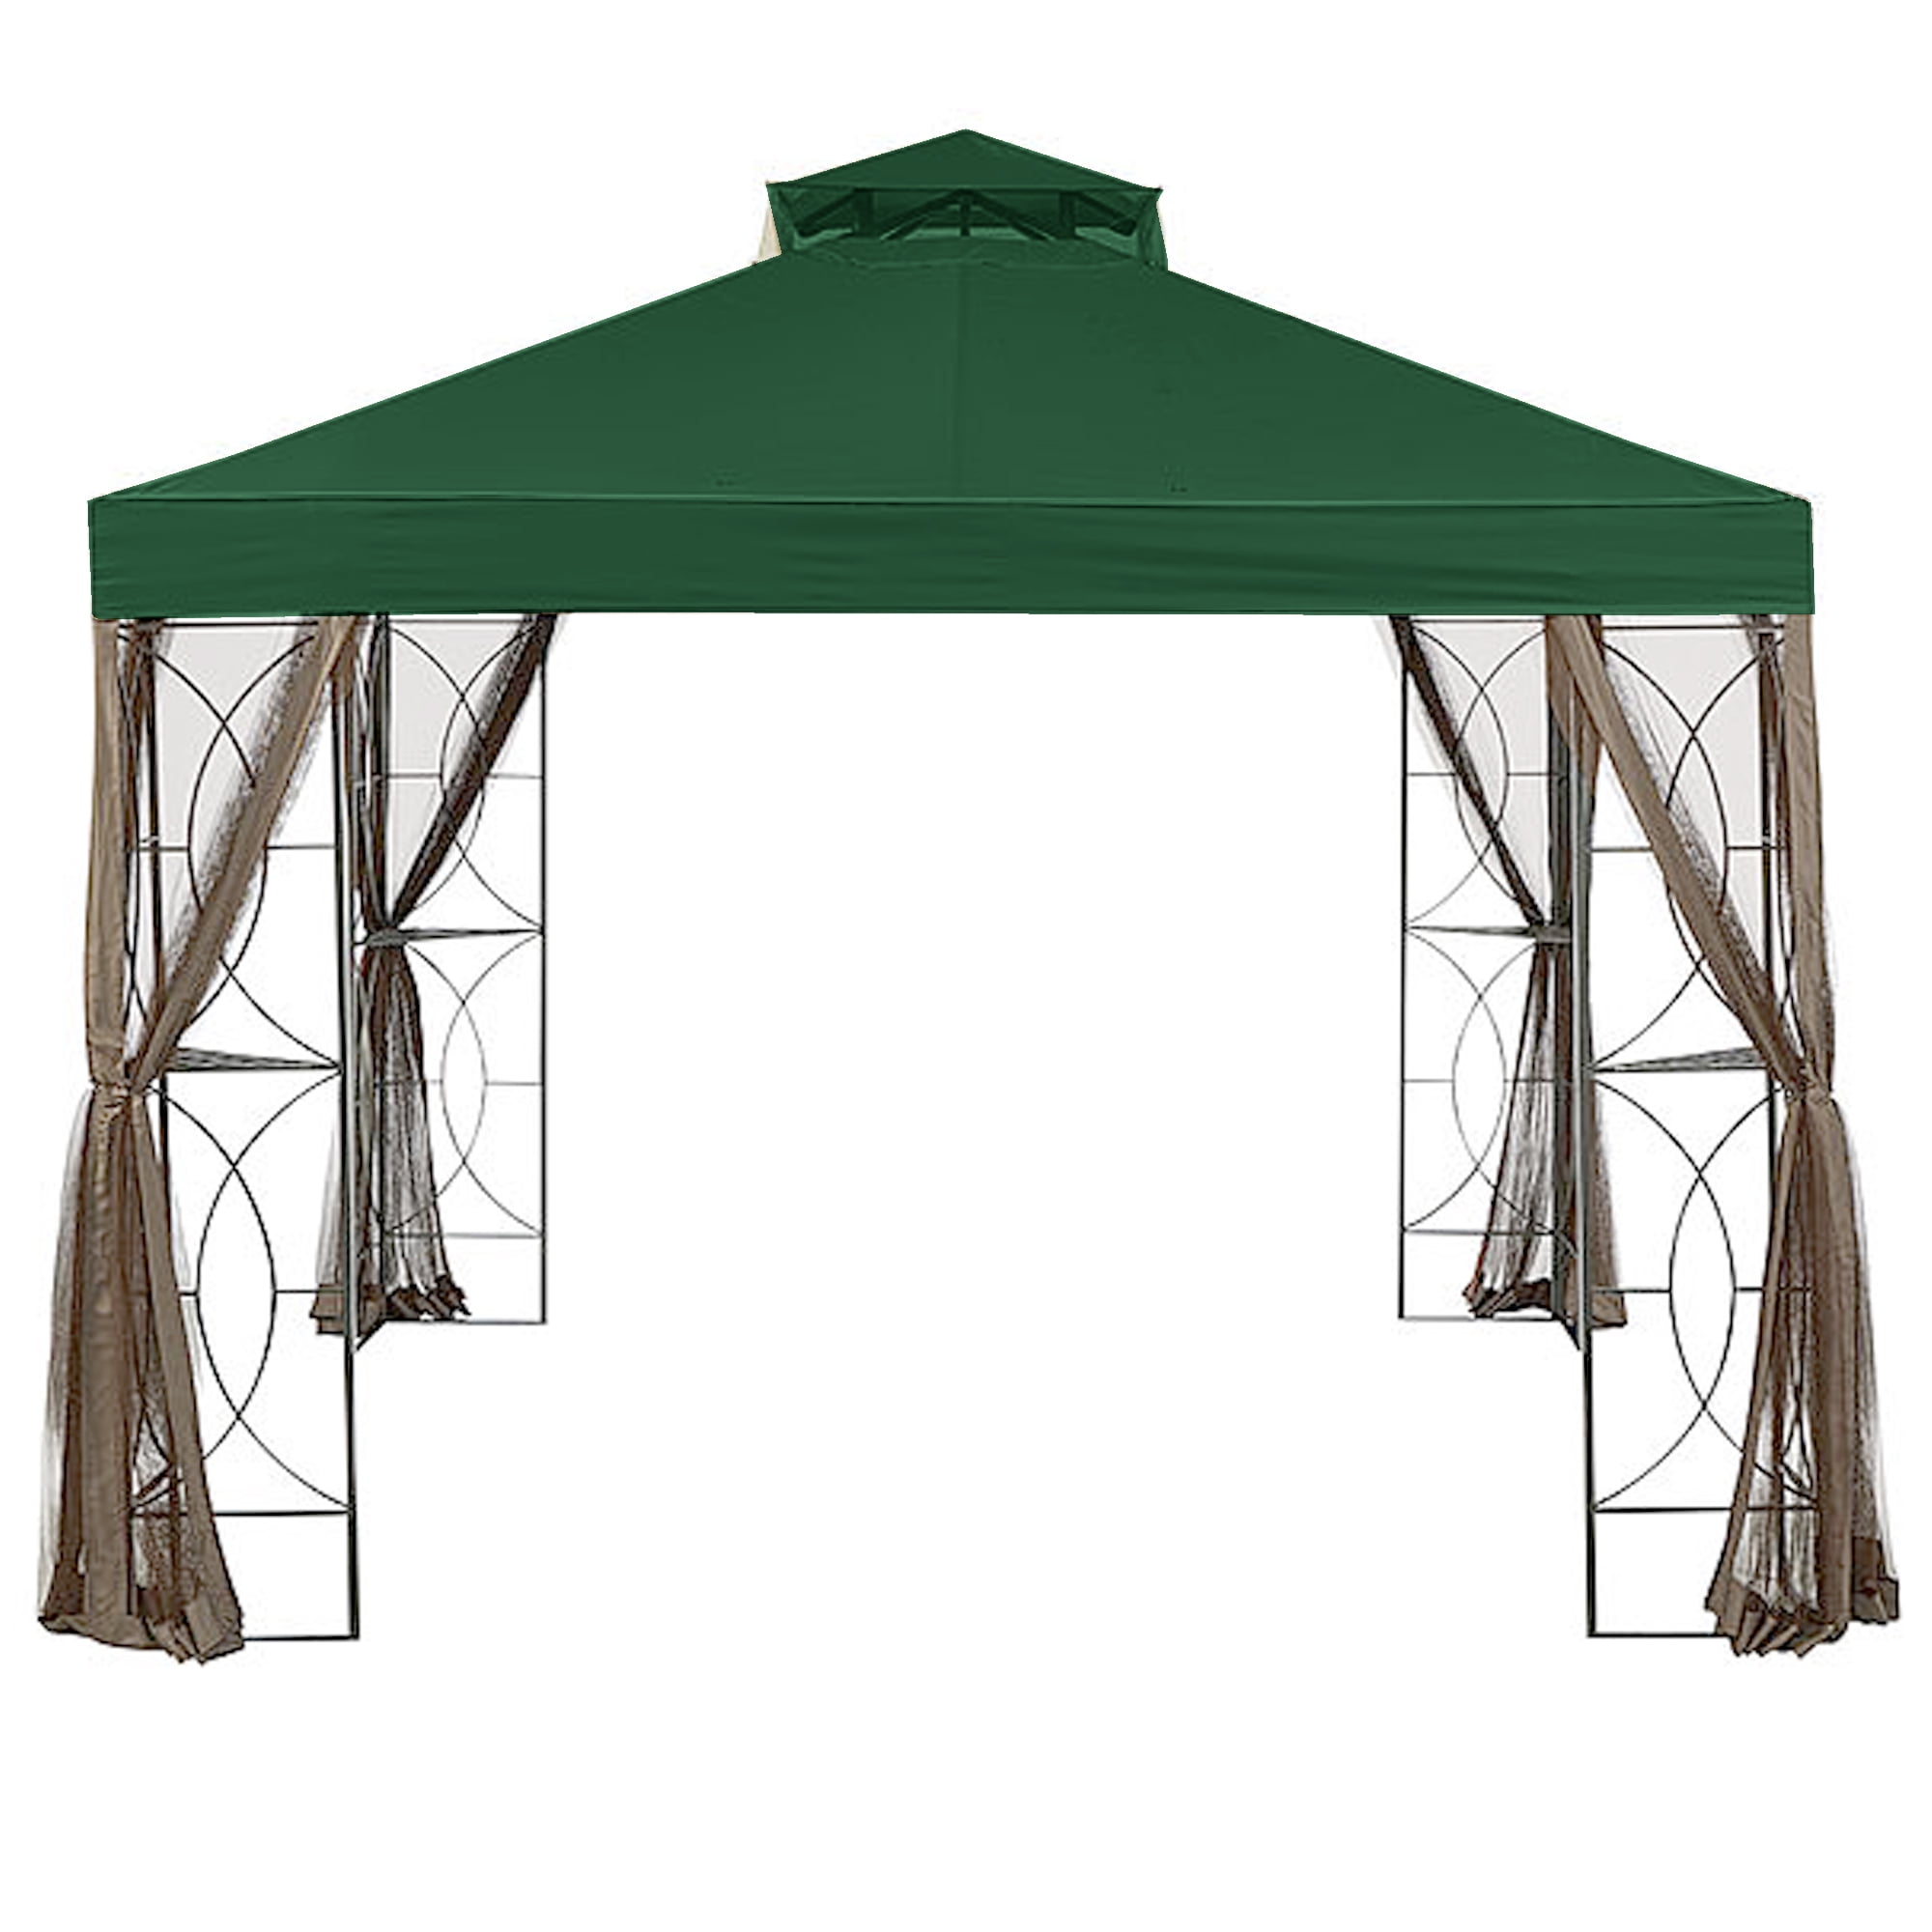 Garden Winds Replacement Canopy Top Cover For The Callaway Gazebo